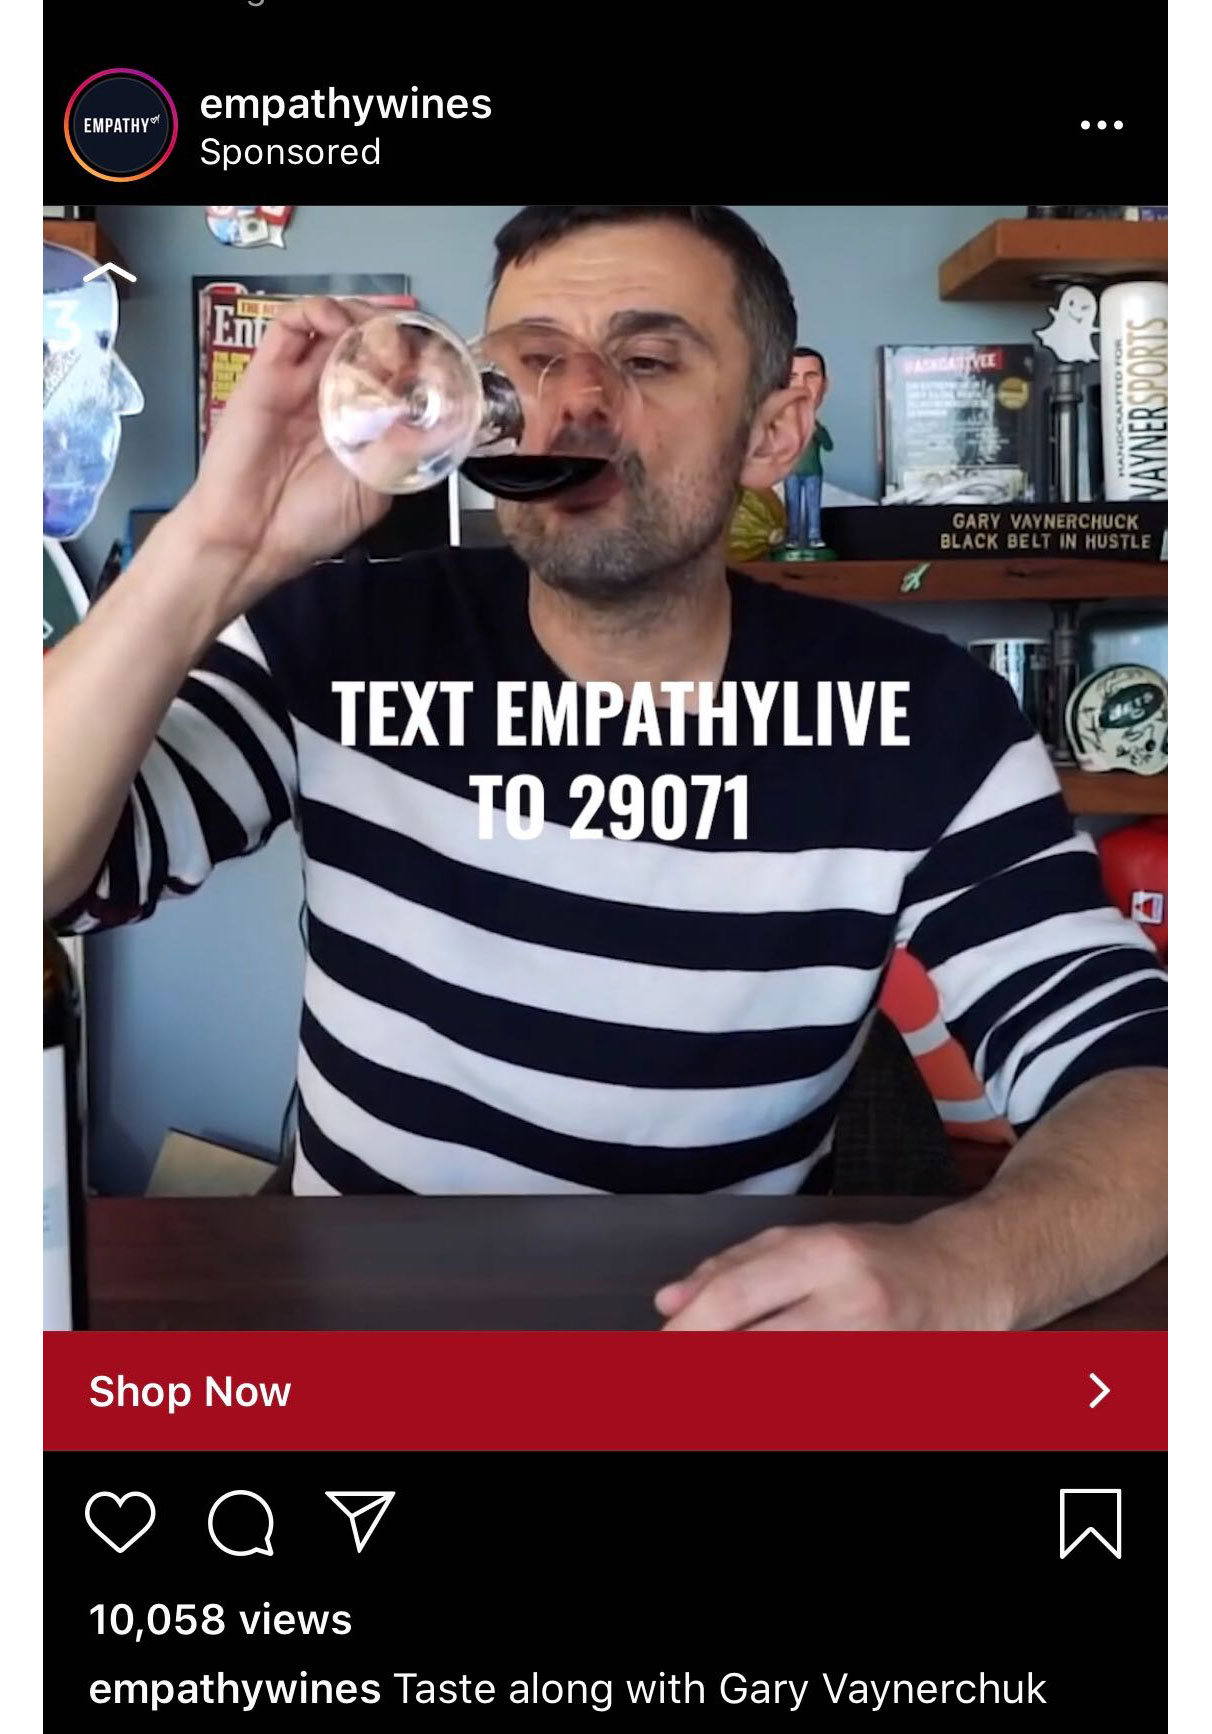 In this example, the keyword is "EMPATHYLIVE"